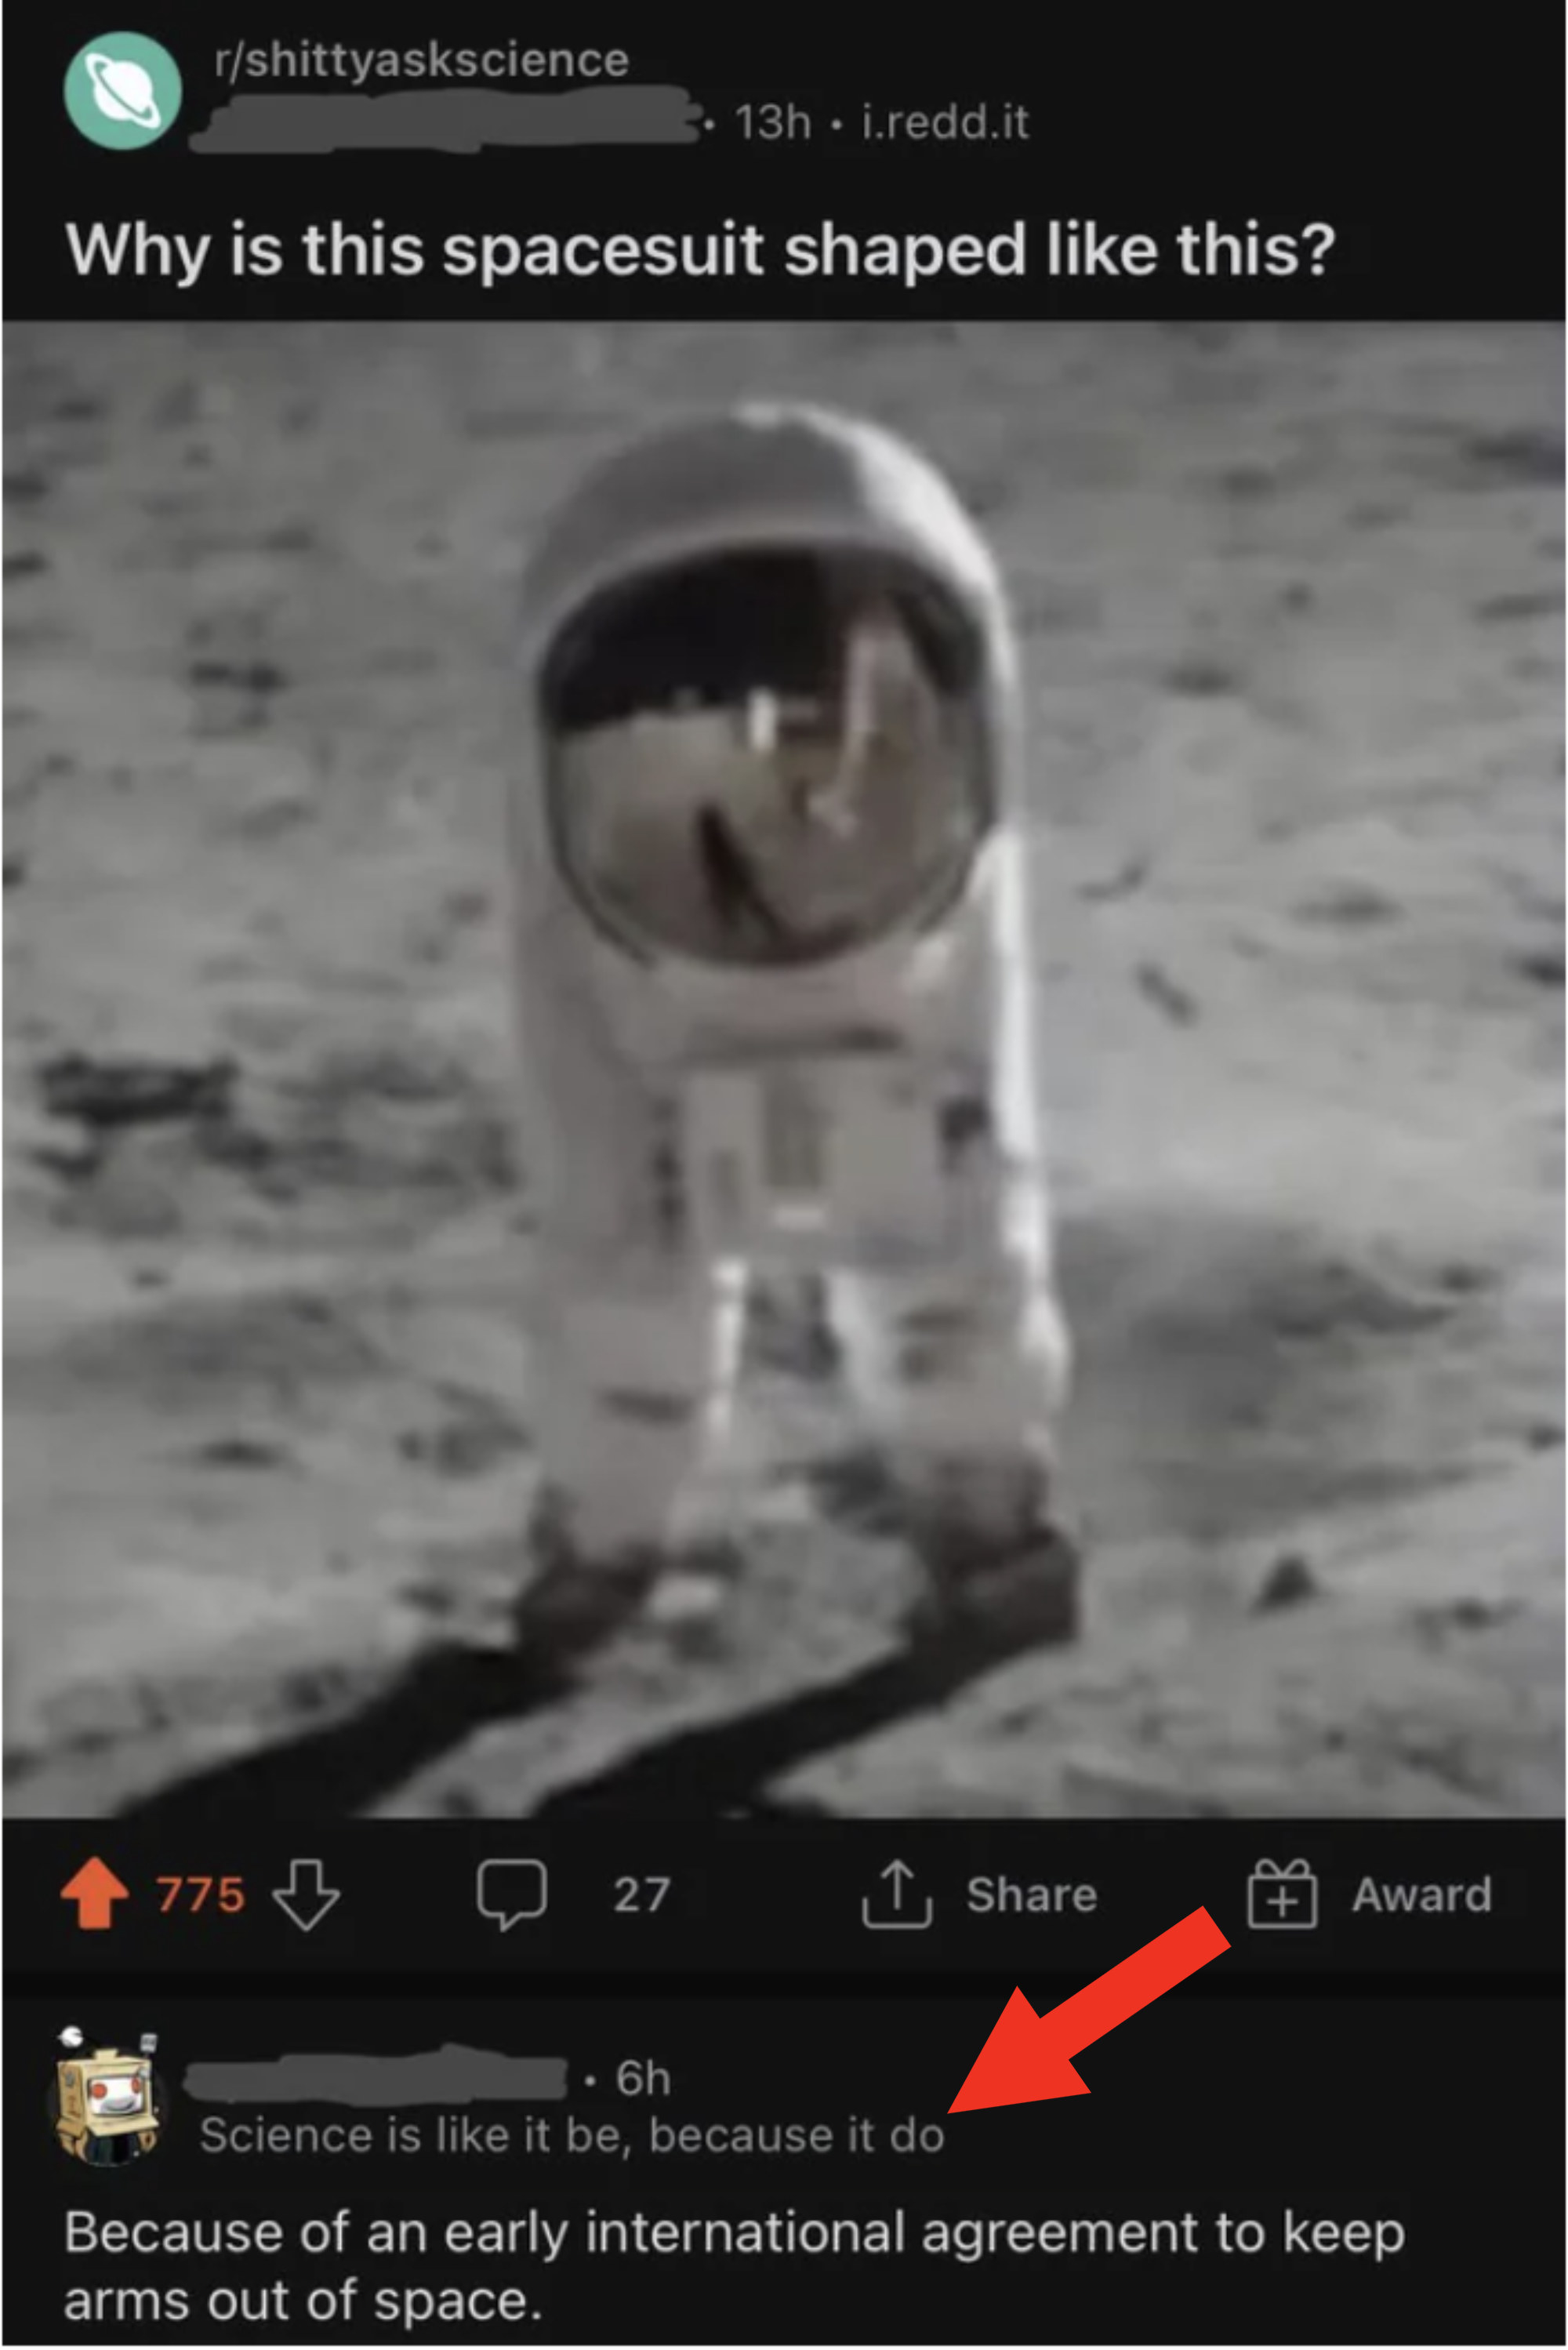 A picture of a photoshopped person on the moon makes their spacesuit look like there's only legs and a head, and a commenter says there was an "early international agreement to keep arms out of space"